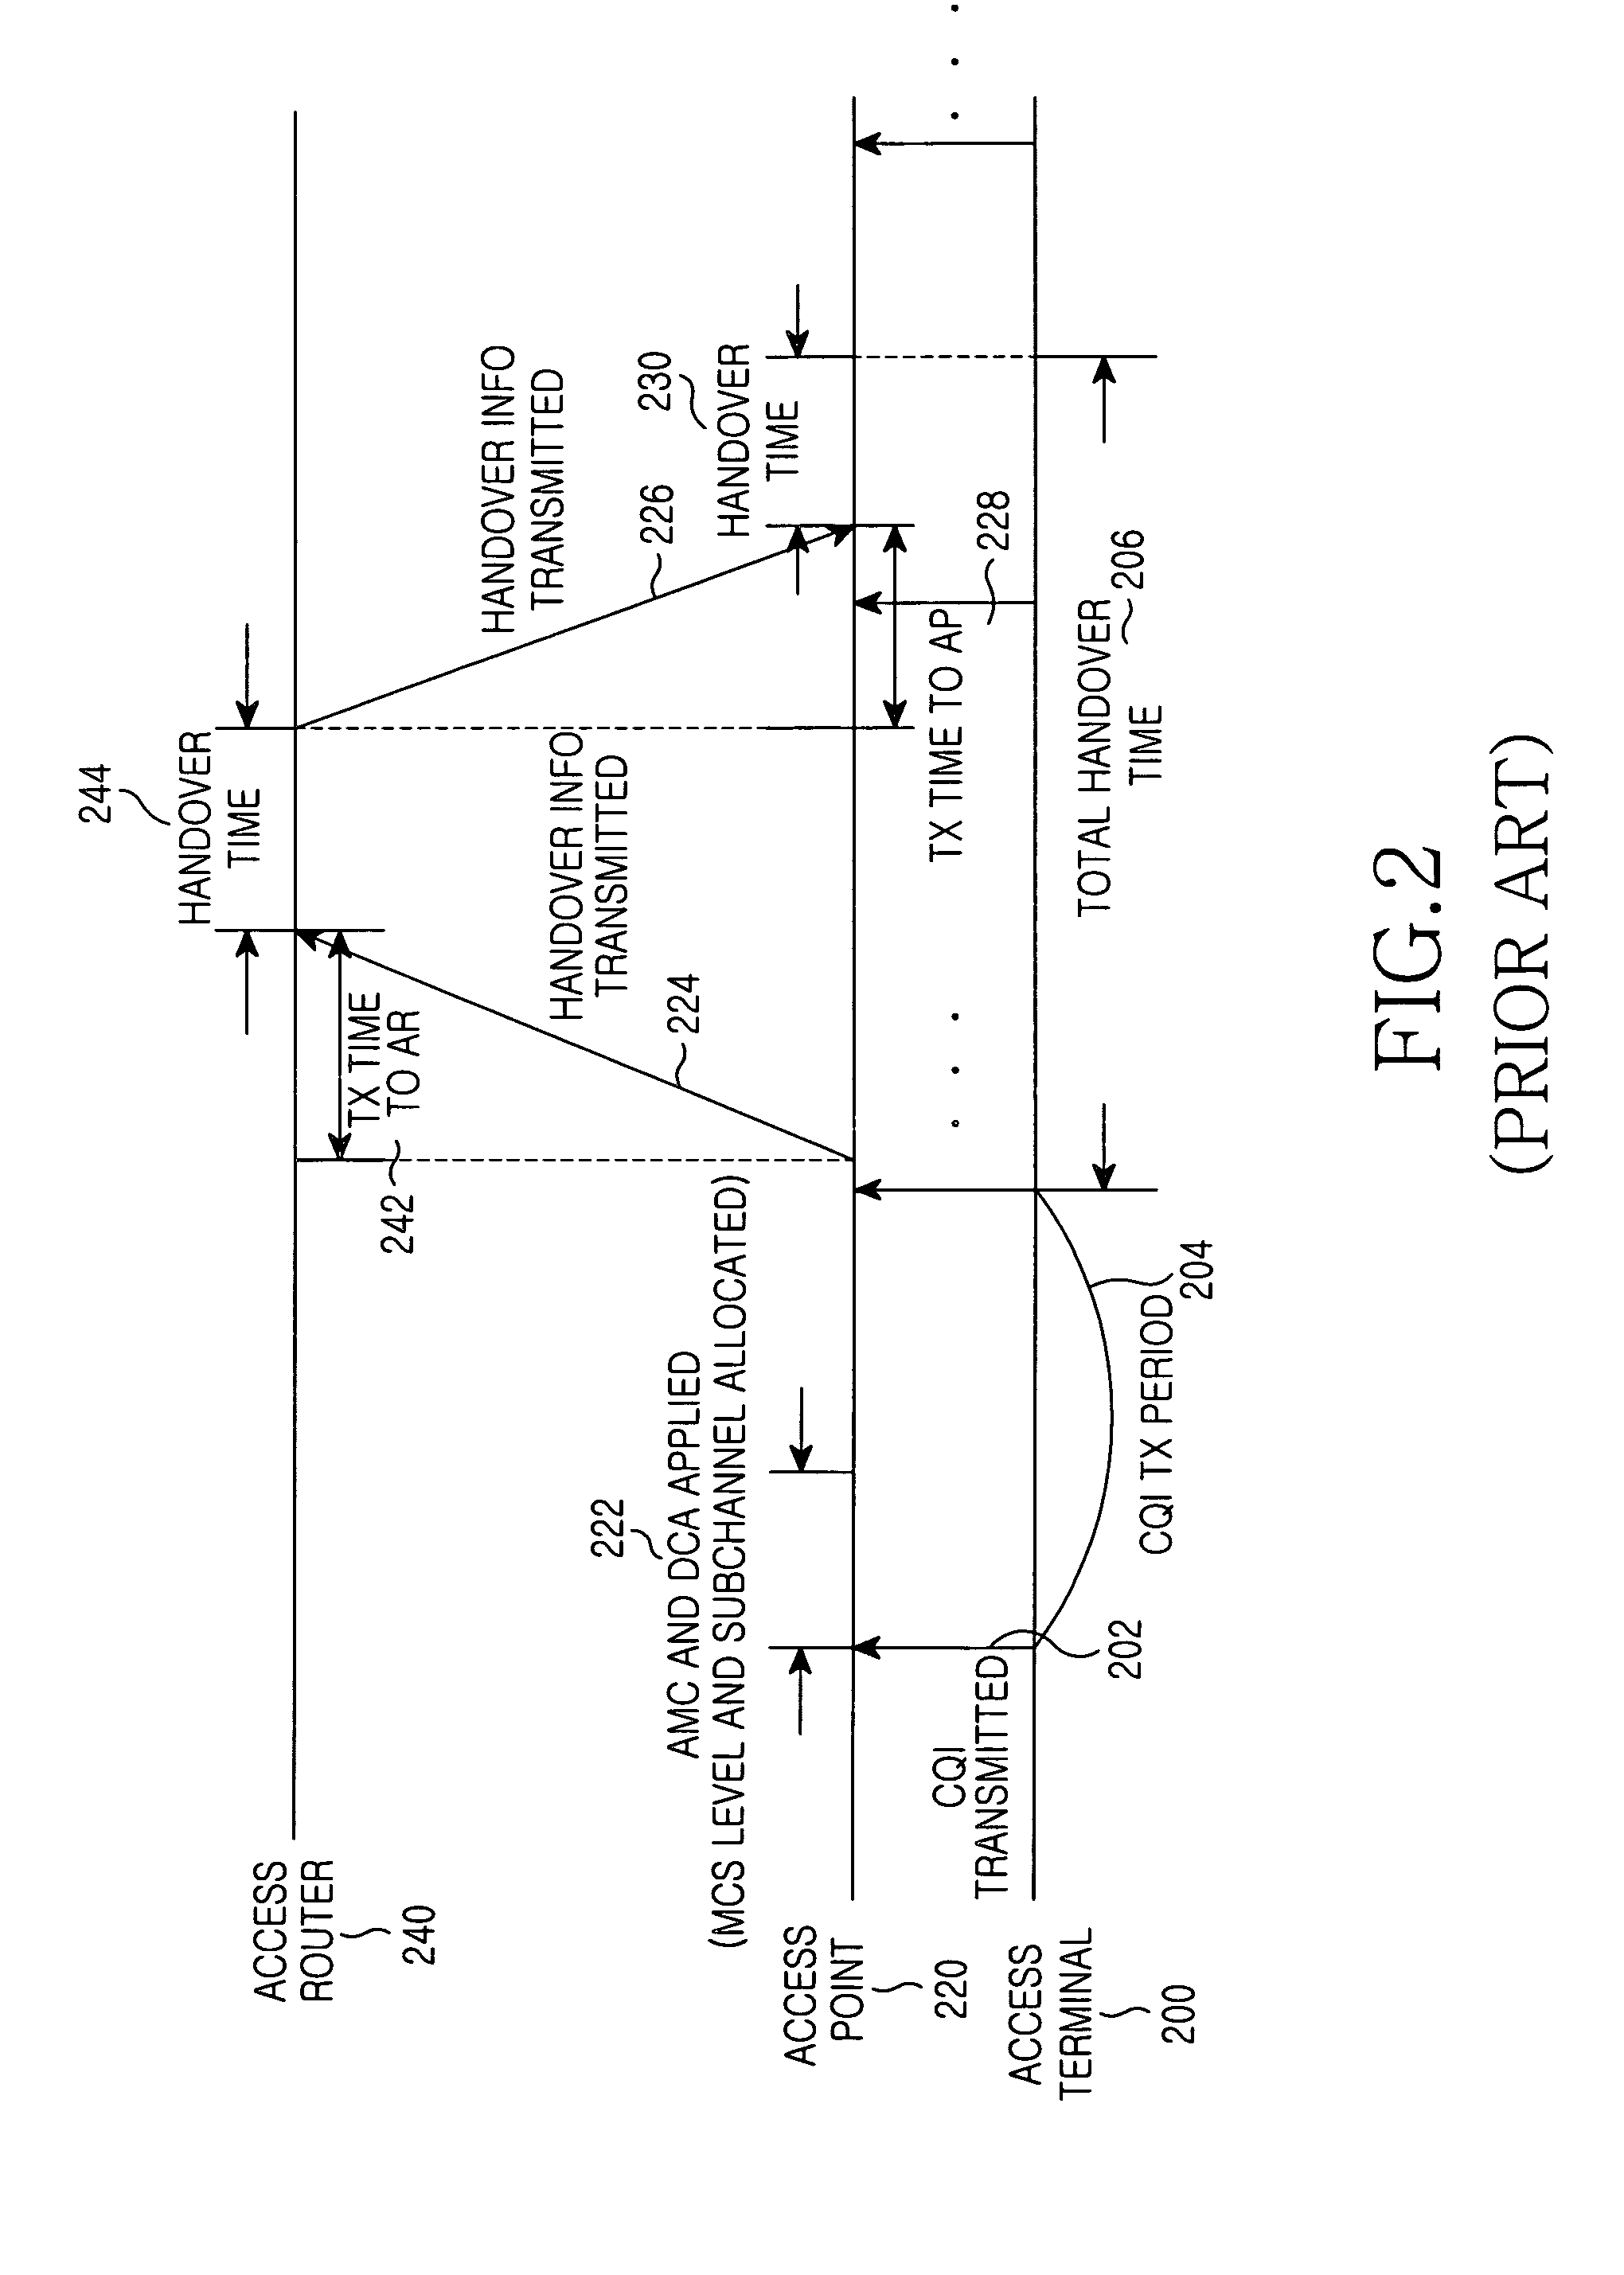 System and method for dynamically allocating resources in a mobile communication system employing orthogonal frequency division multiple access